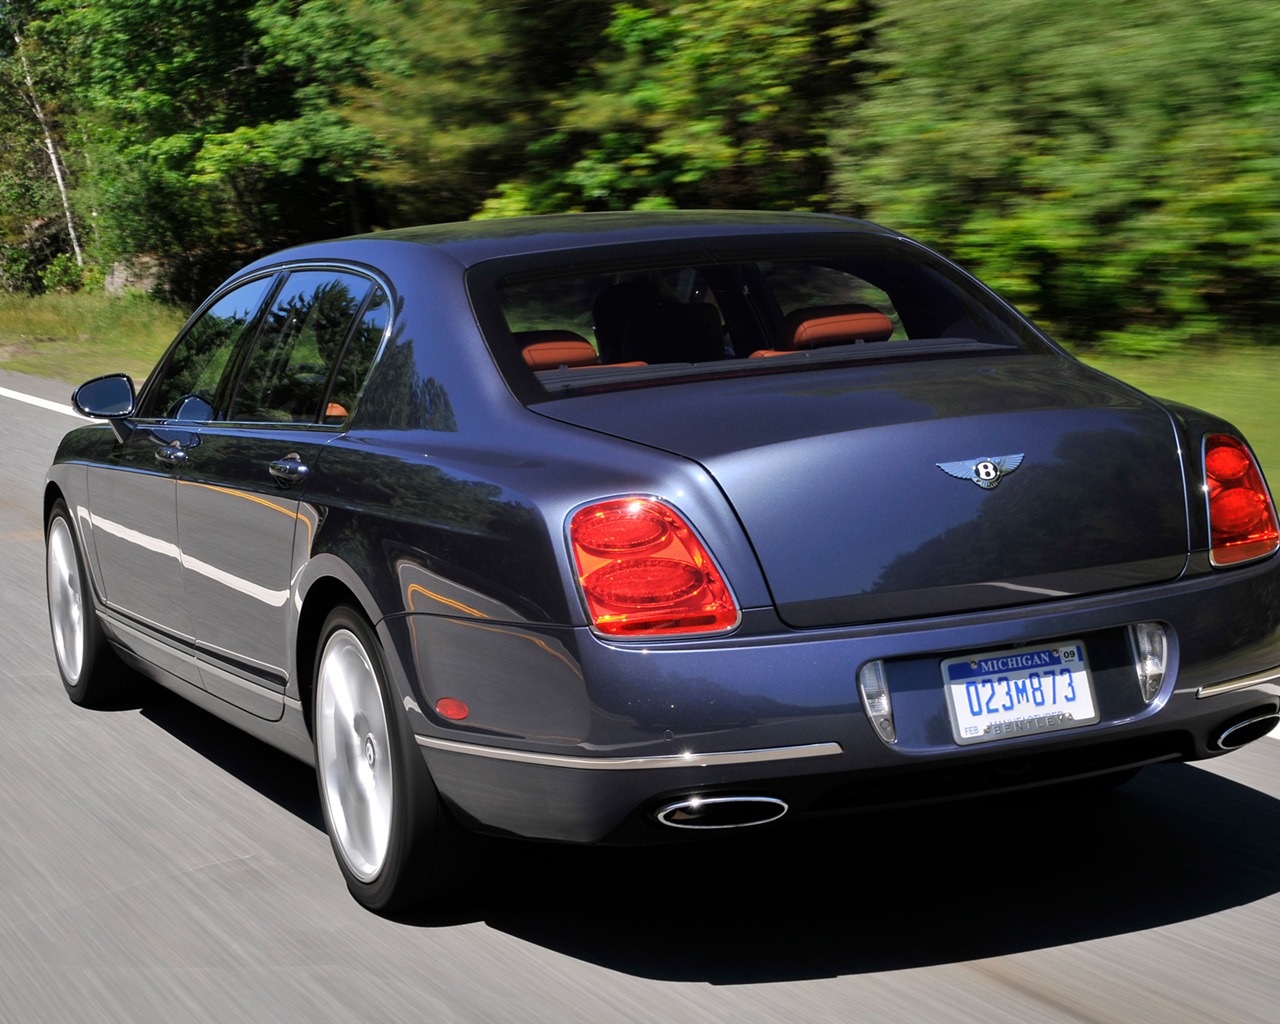 Bentley Continental Flying Spur Speed - 2008 賓利 #13 - 1280x1024